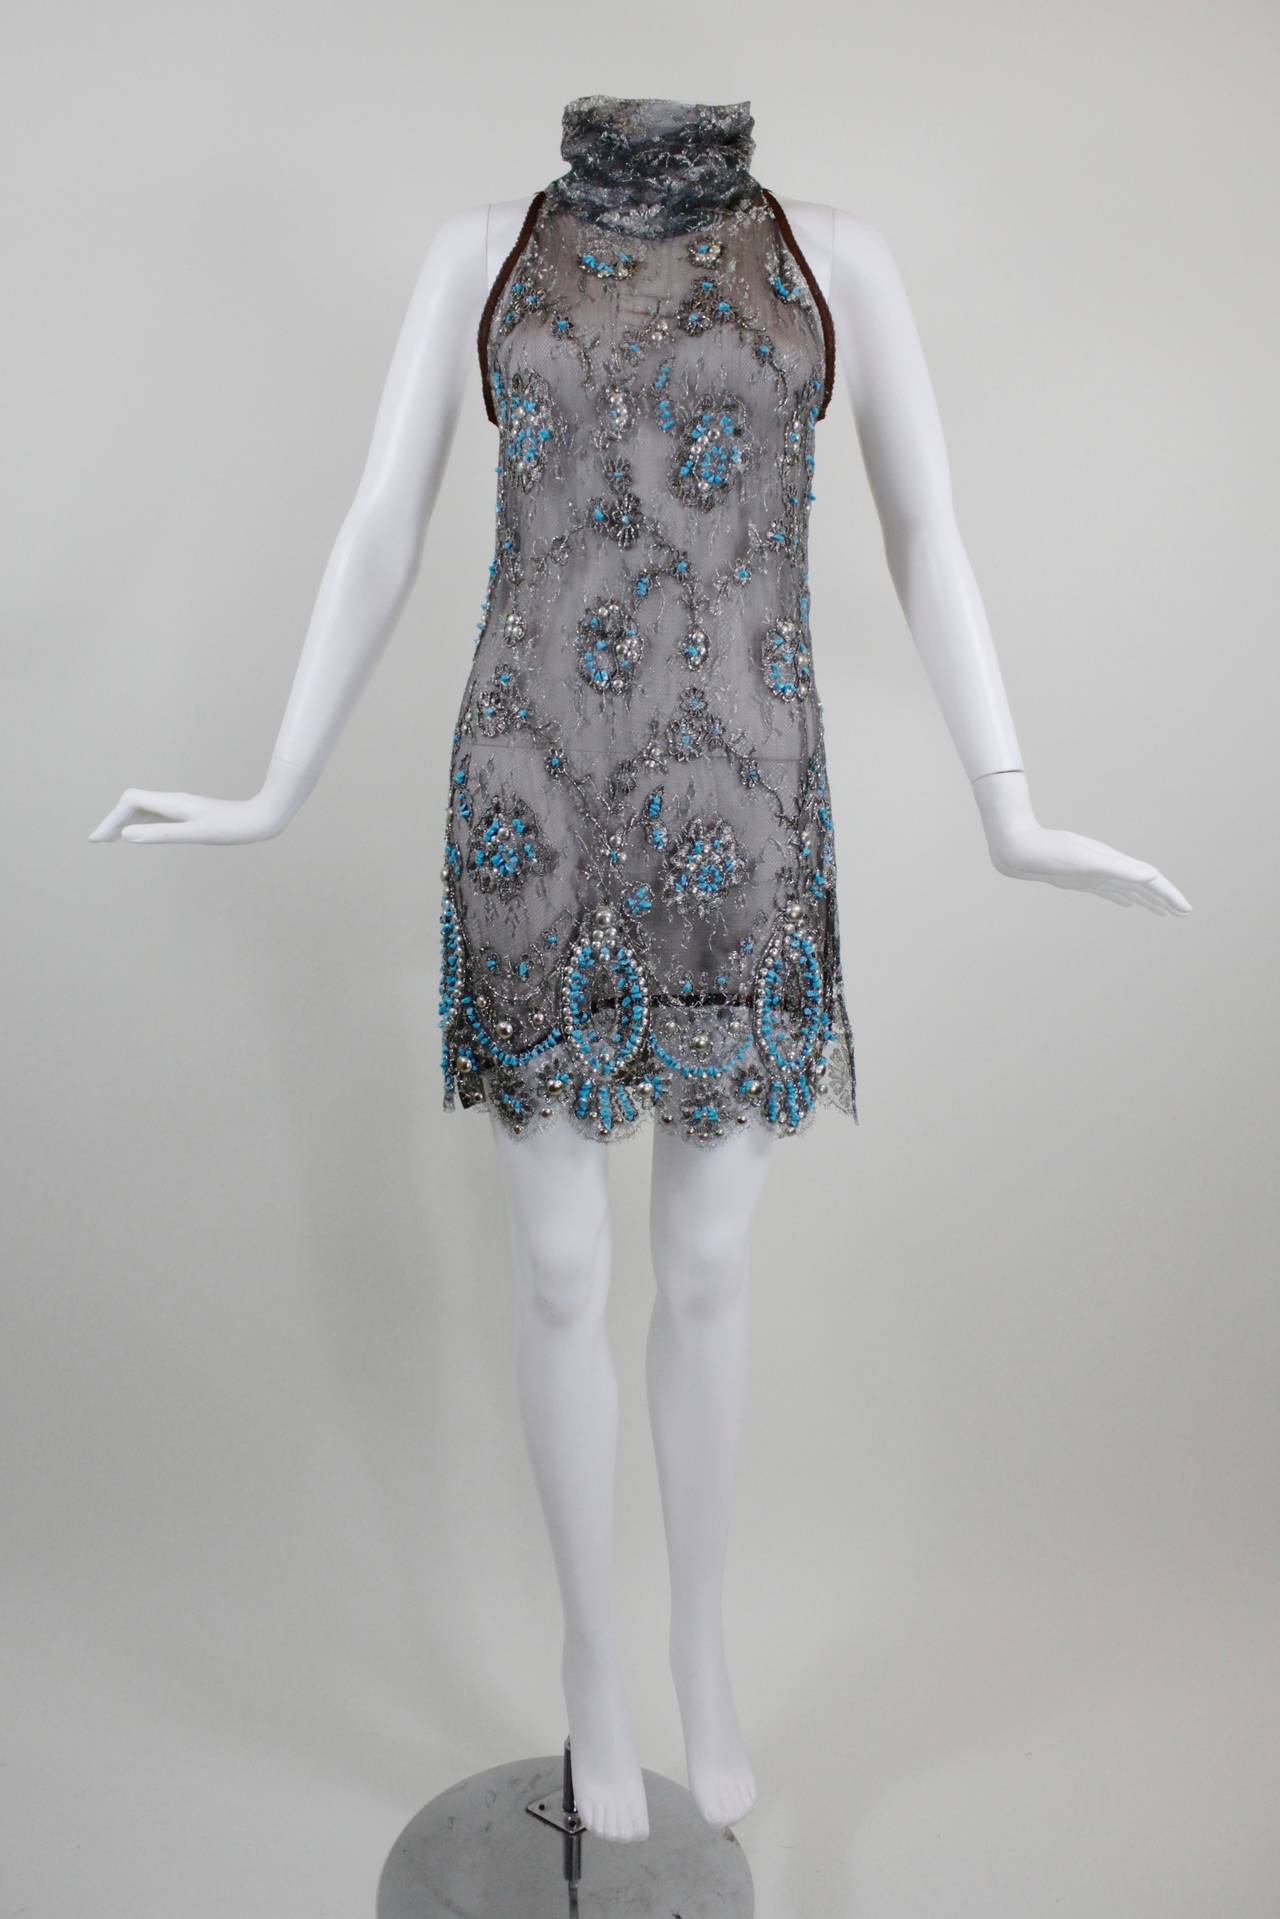 This is a beautiful tabard-style micro-mini dress from Gianfranco Ferre--the ultimate sexy cocktail frock! Charcoal and silver metallic lace lay over a taupe silk lining. The lace is embroidered with silver metallic thread, and features silver